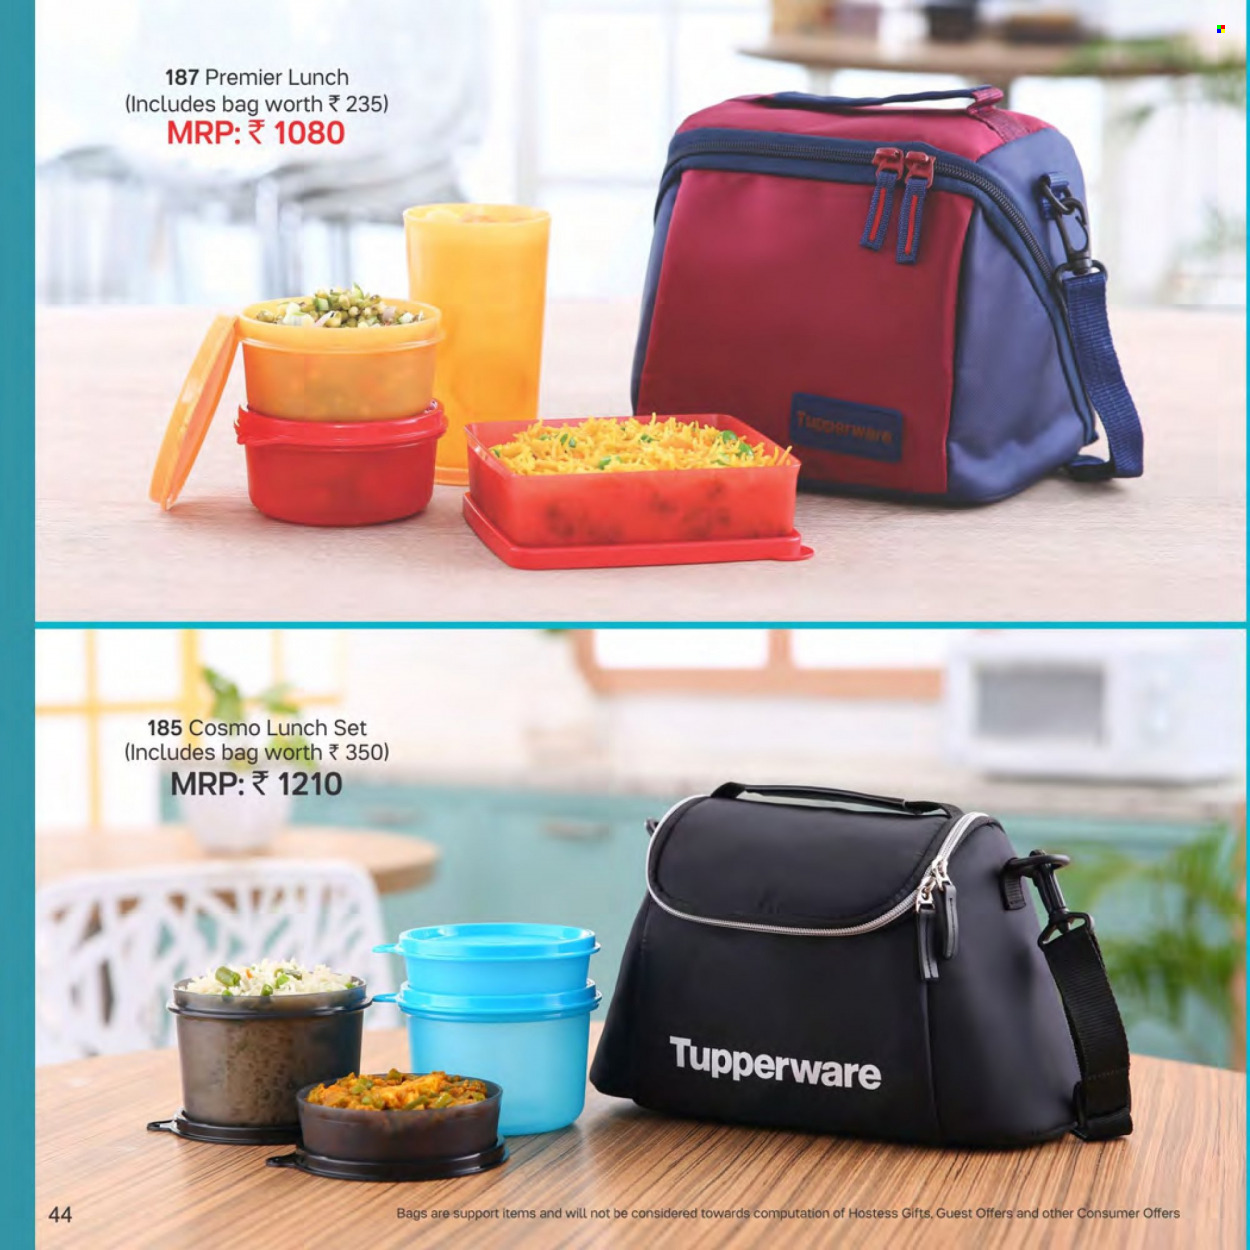 Tupperware offer . Page 44.